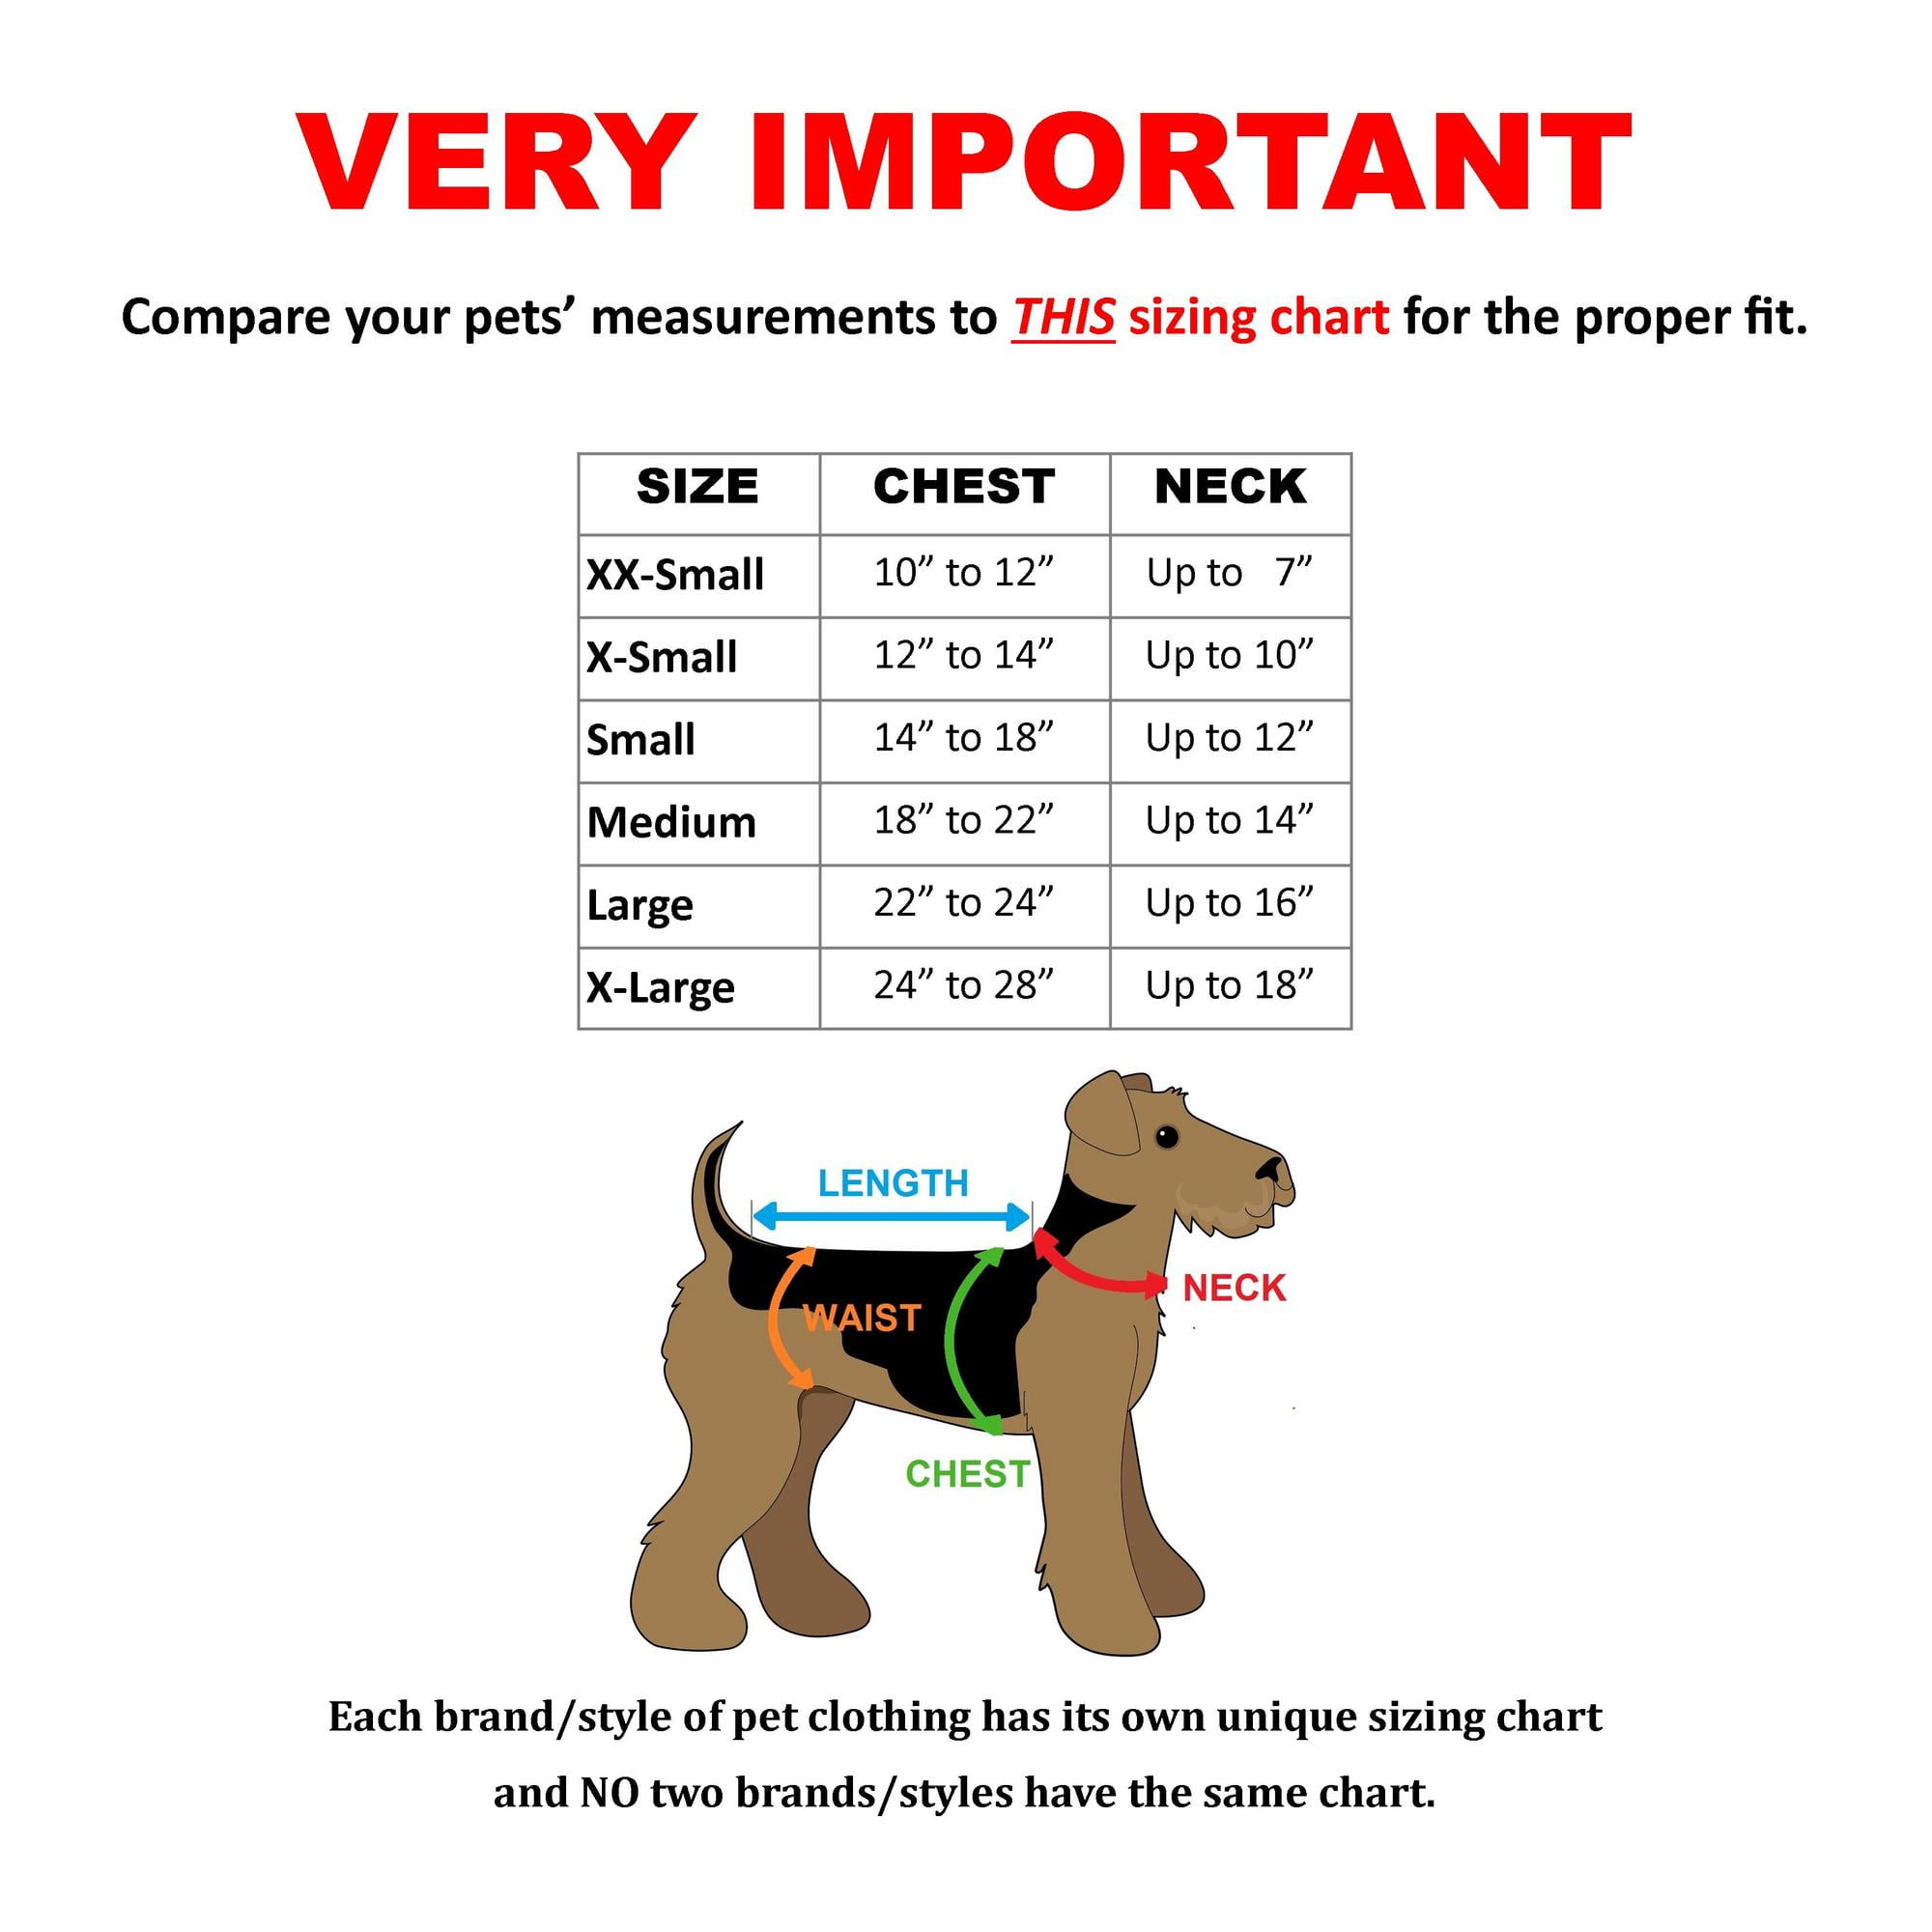 Dog Harness Size Chart By Breed